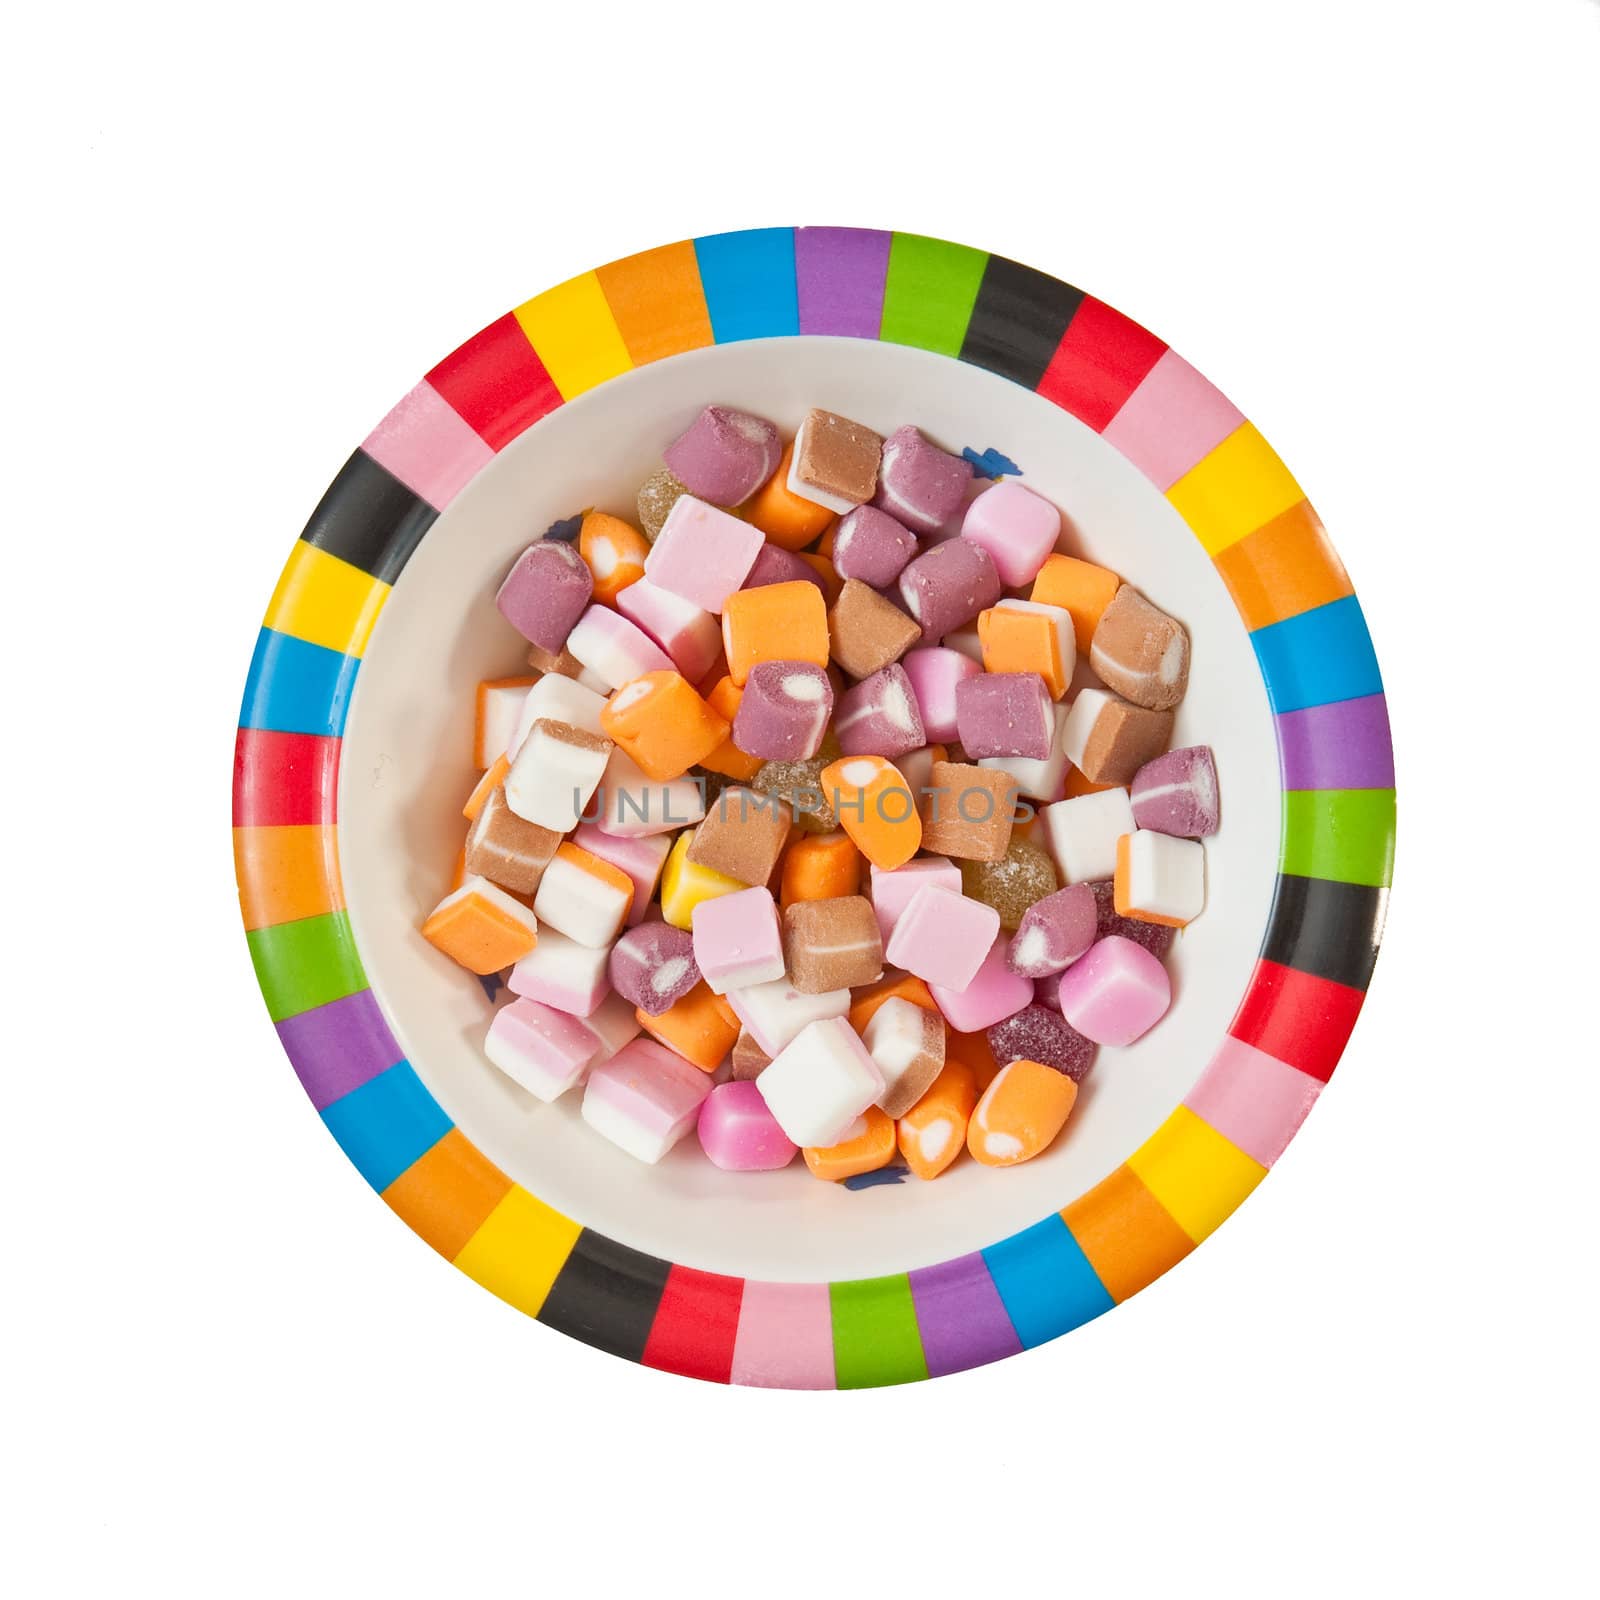 Nice bowl of dolly mixture candy isolated on white